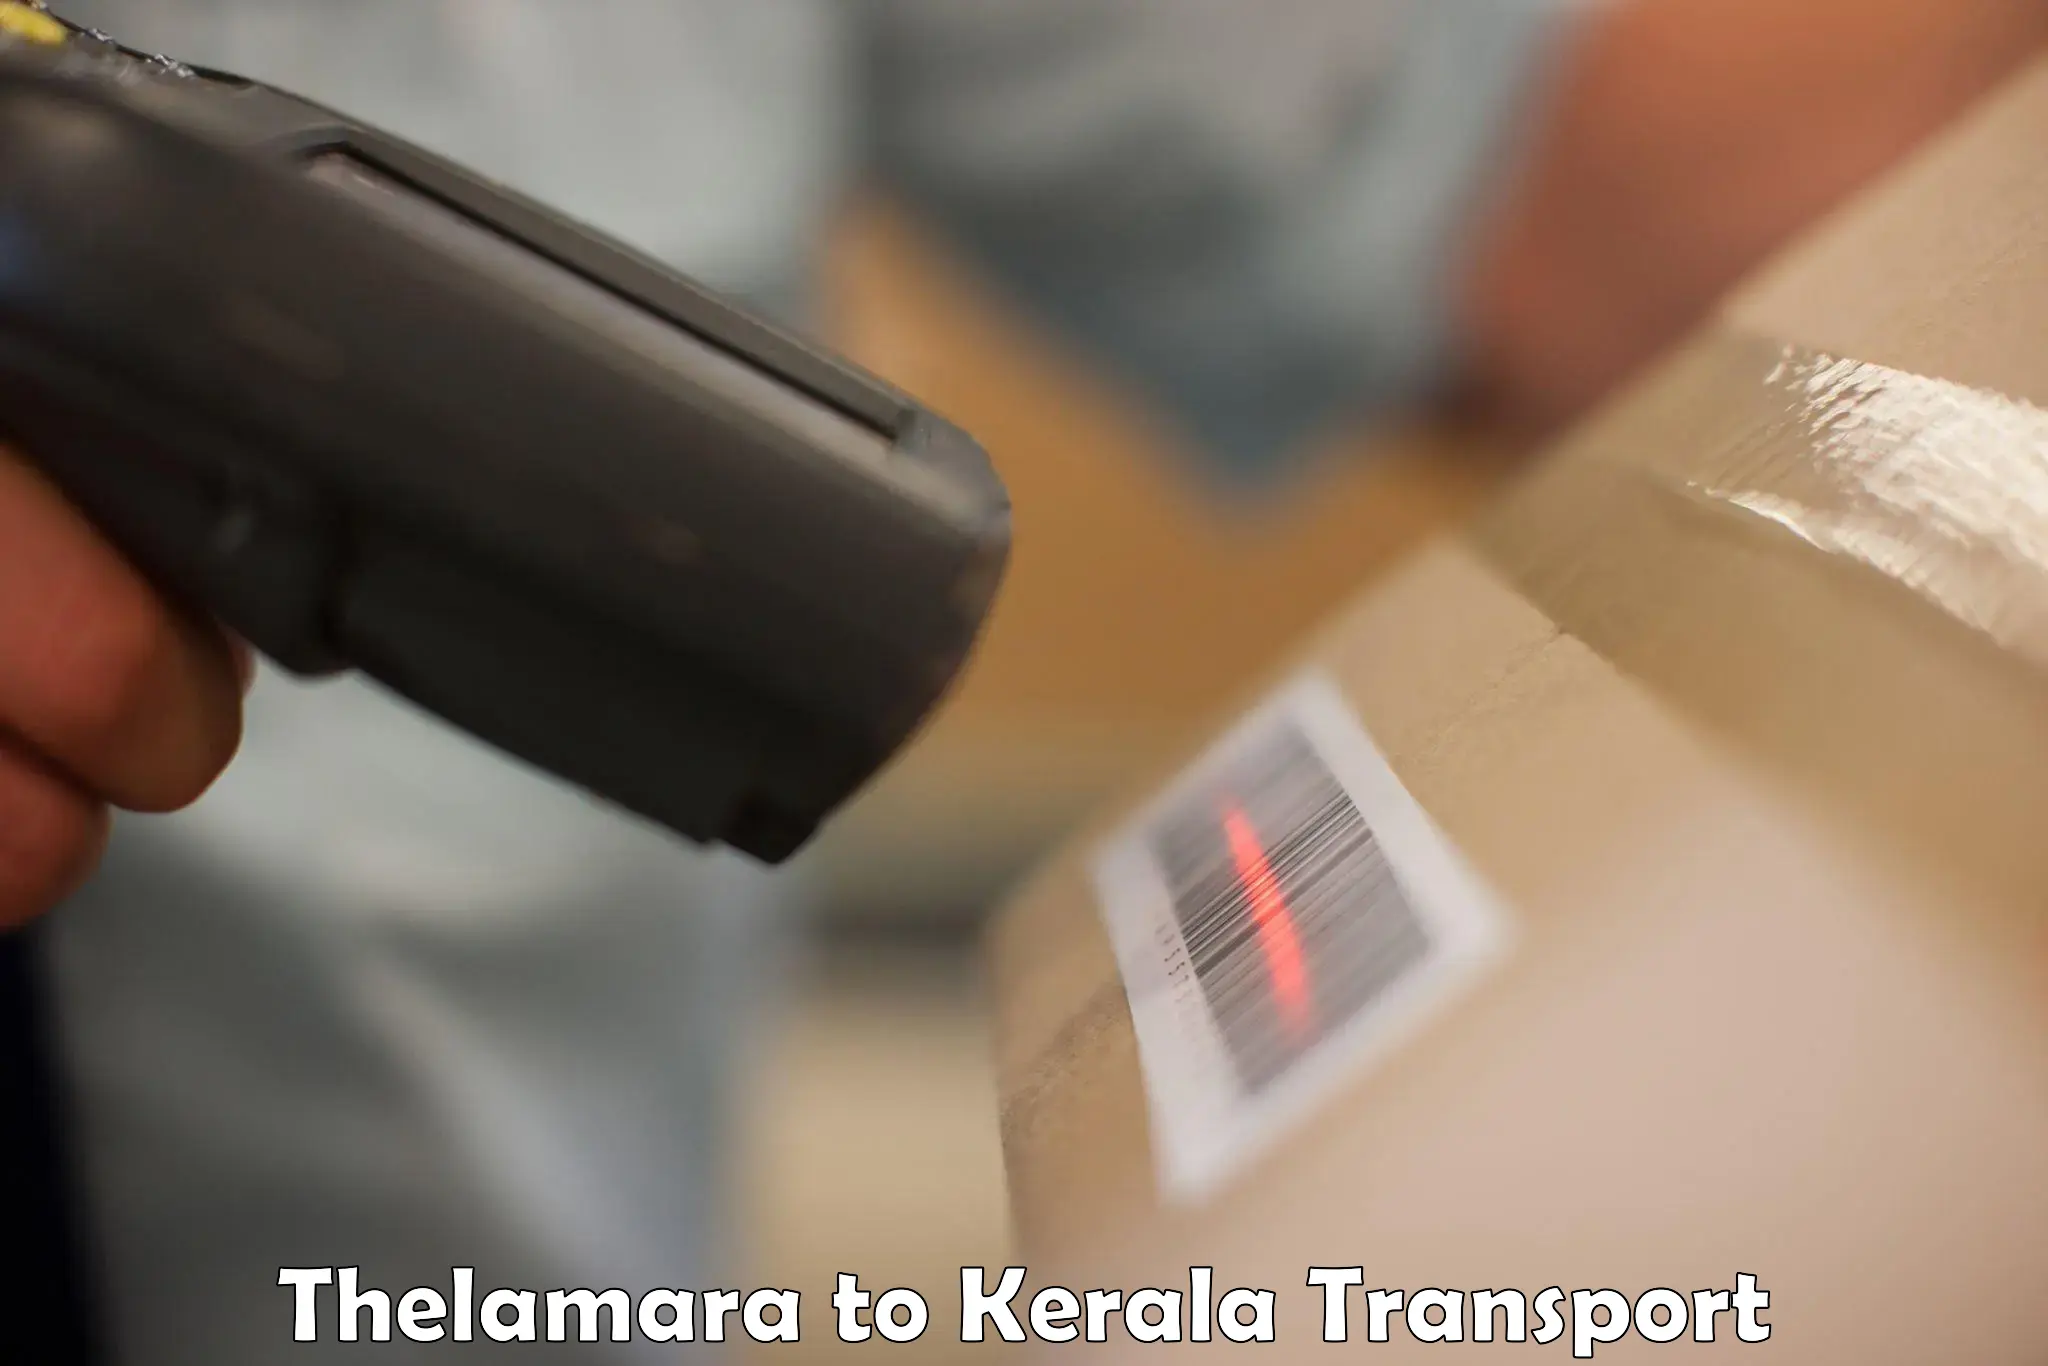 Transport bike from one state to another Thelamara to Ernakulam